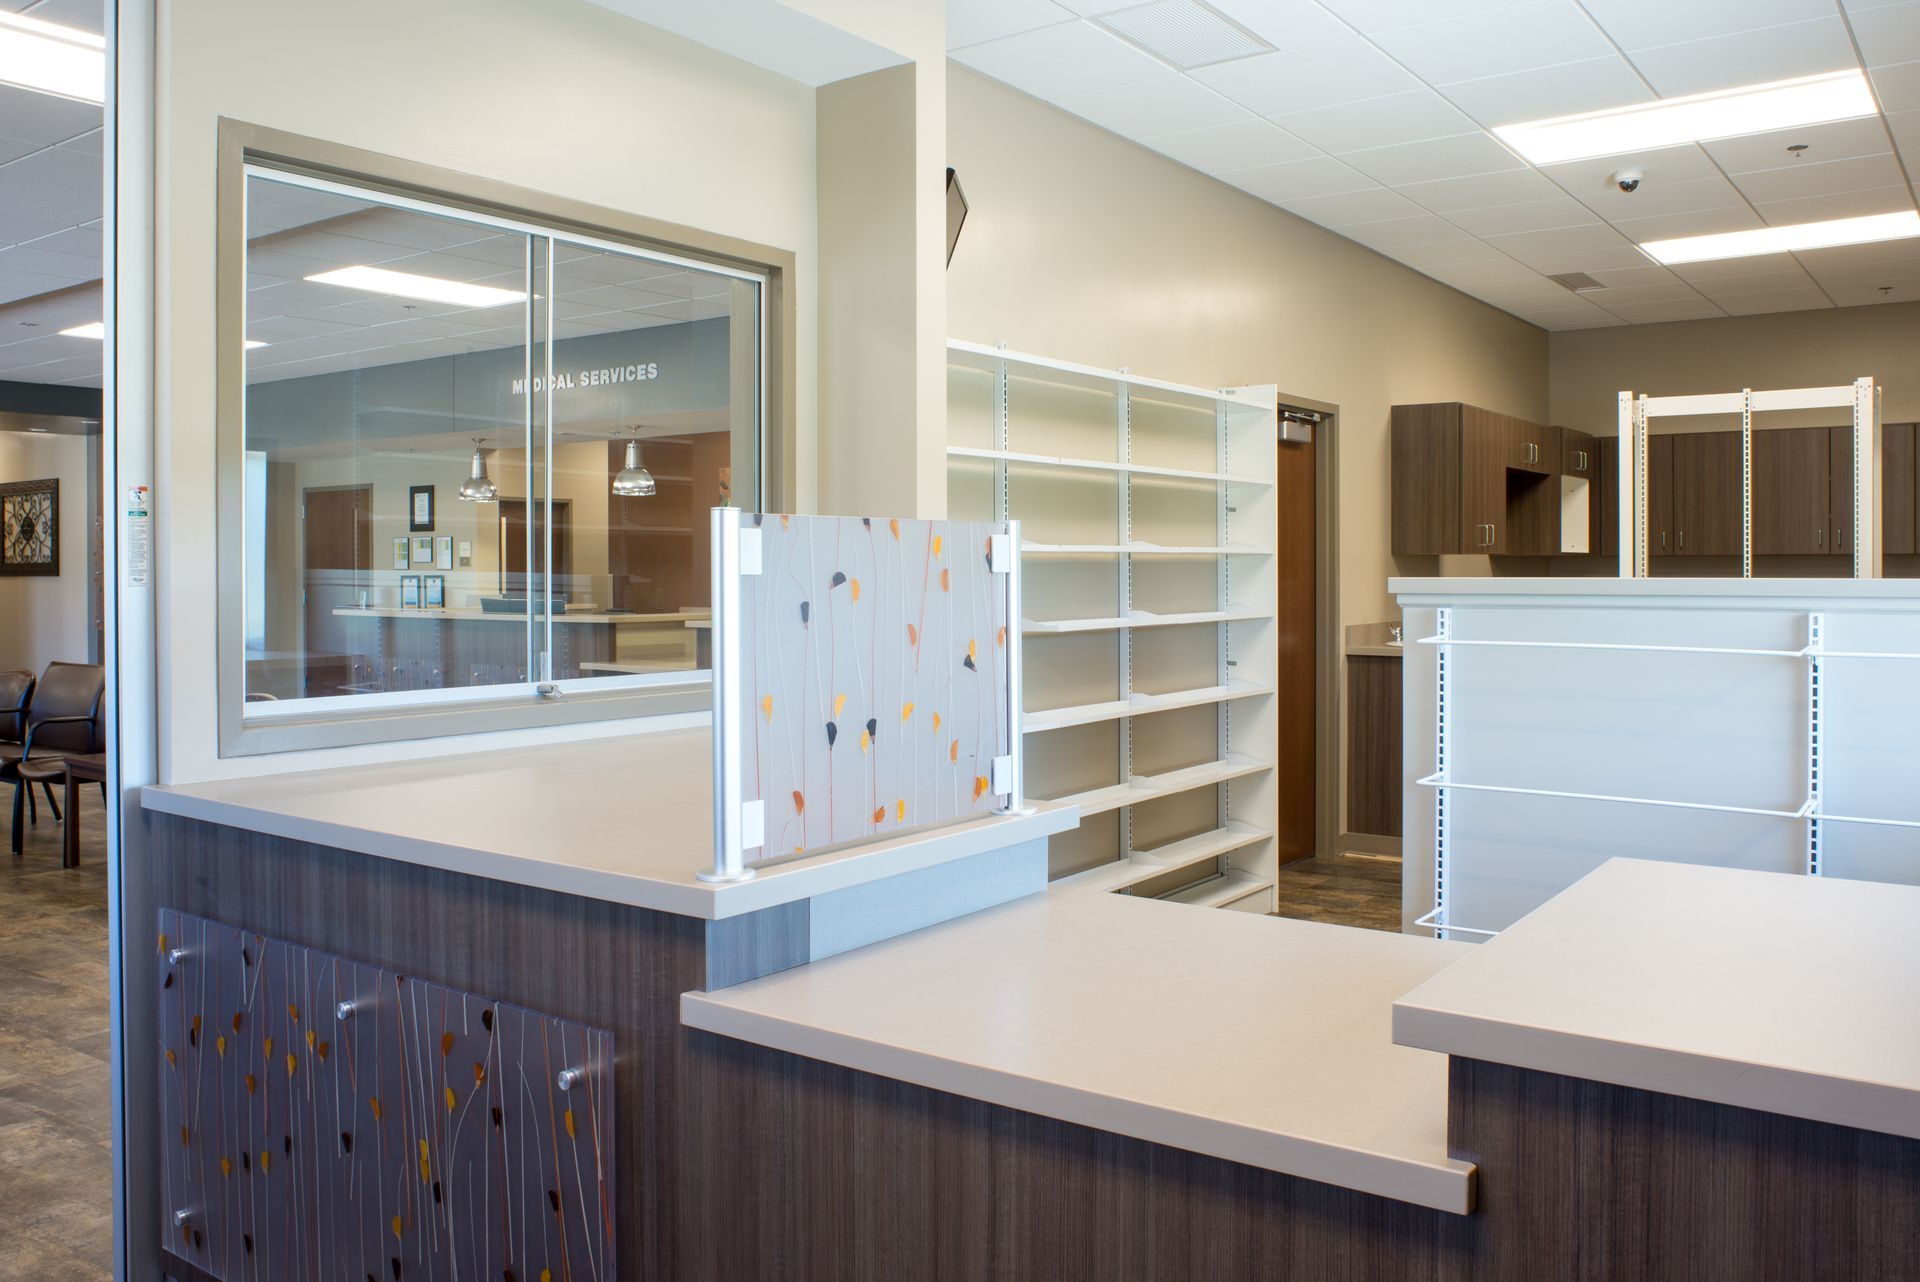 Professional Contractors & Engineers Builds Attractive Medical Offices in Moberly, MO.